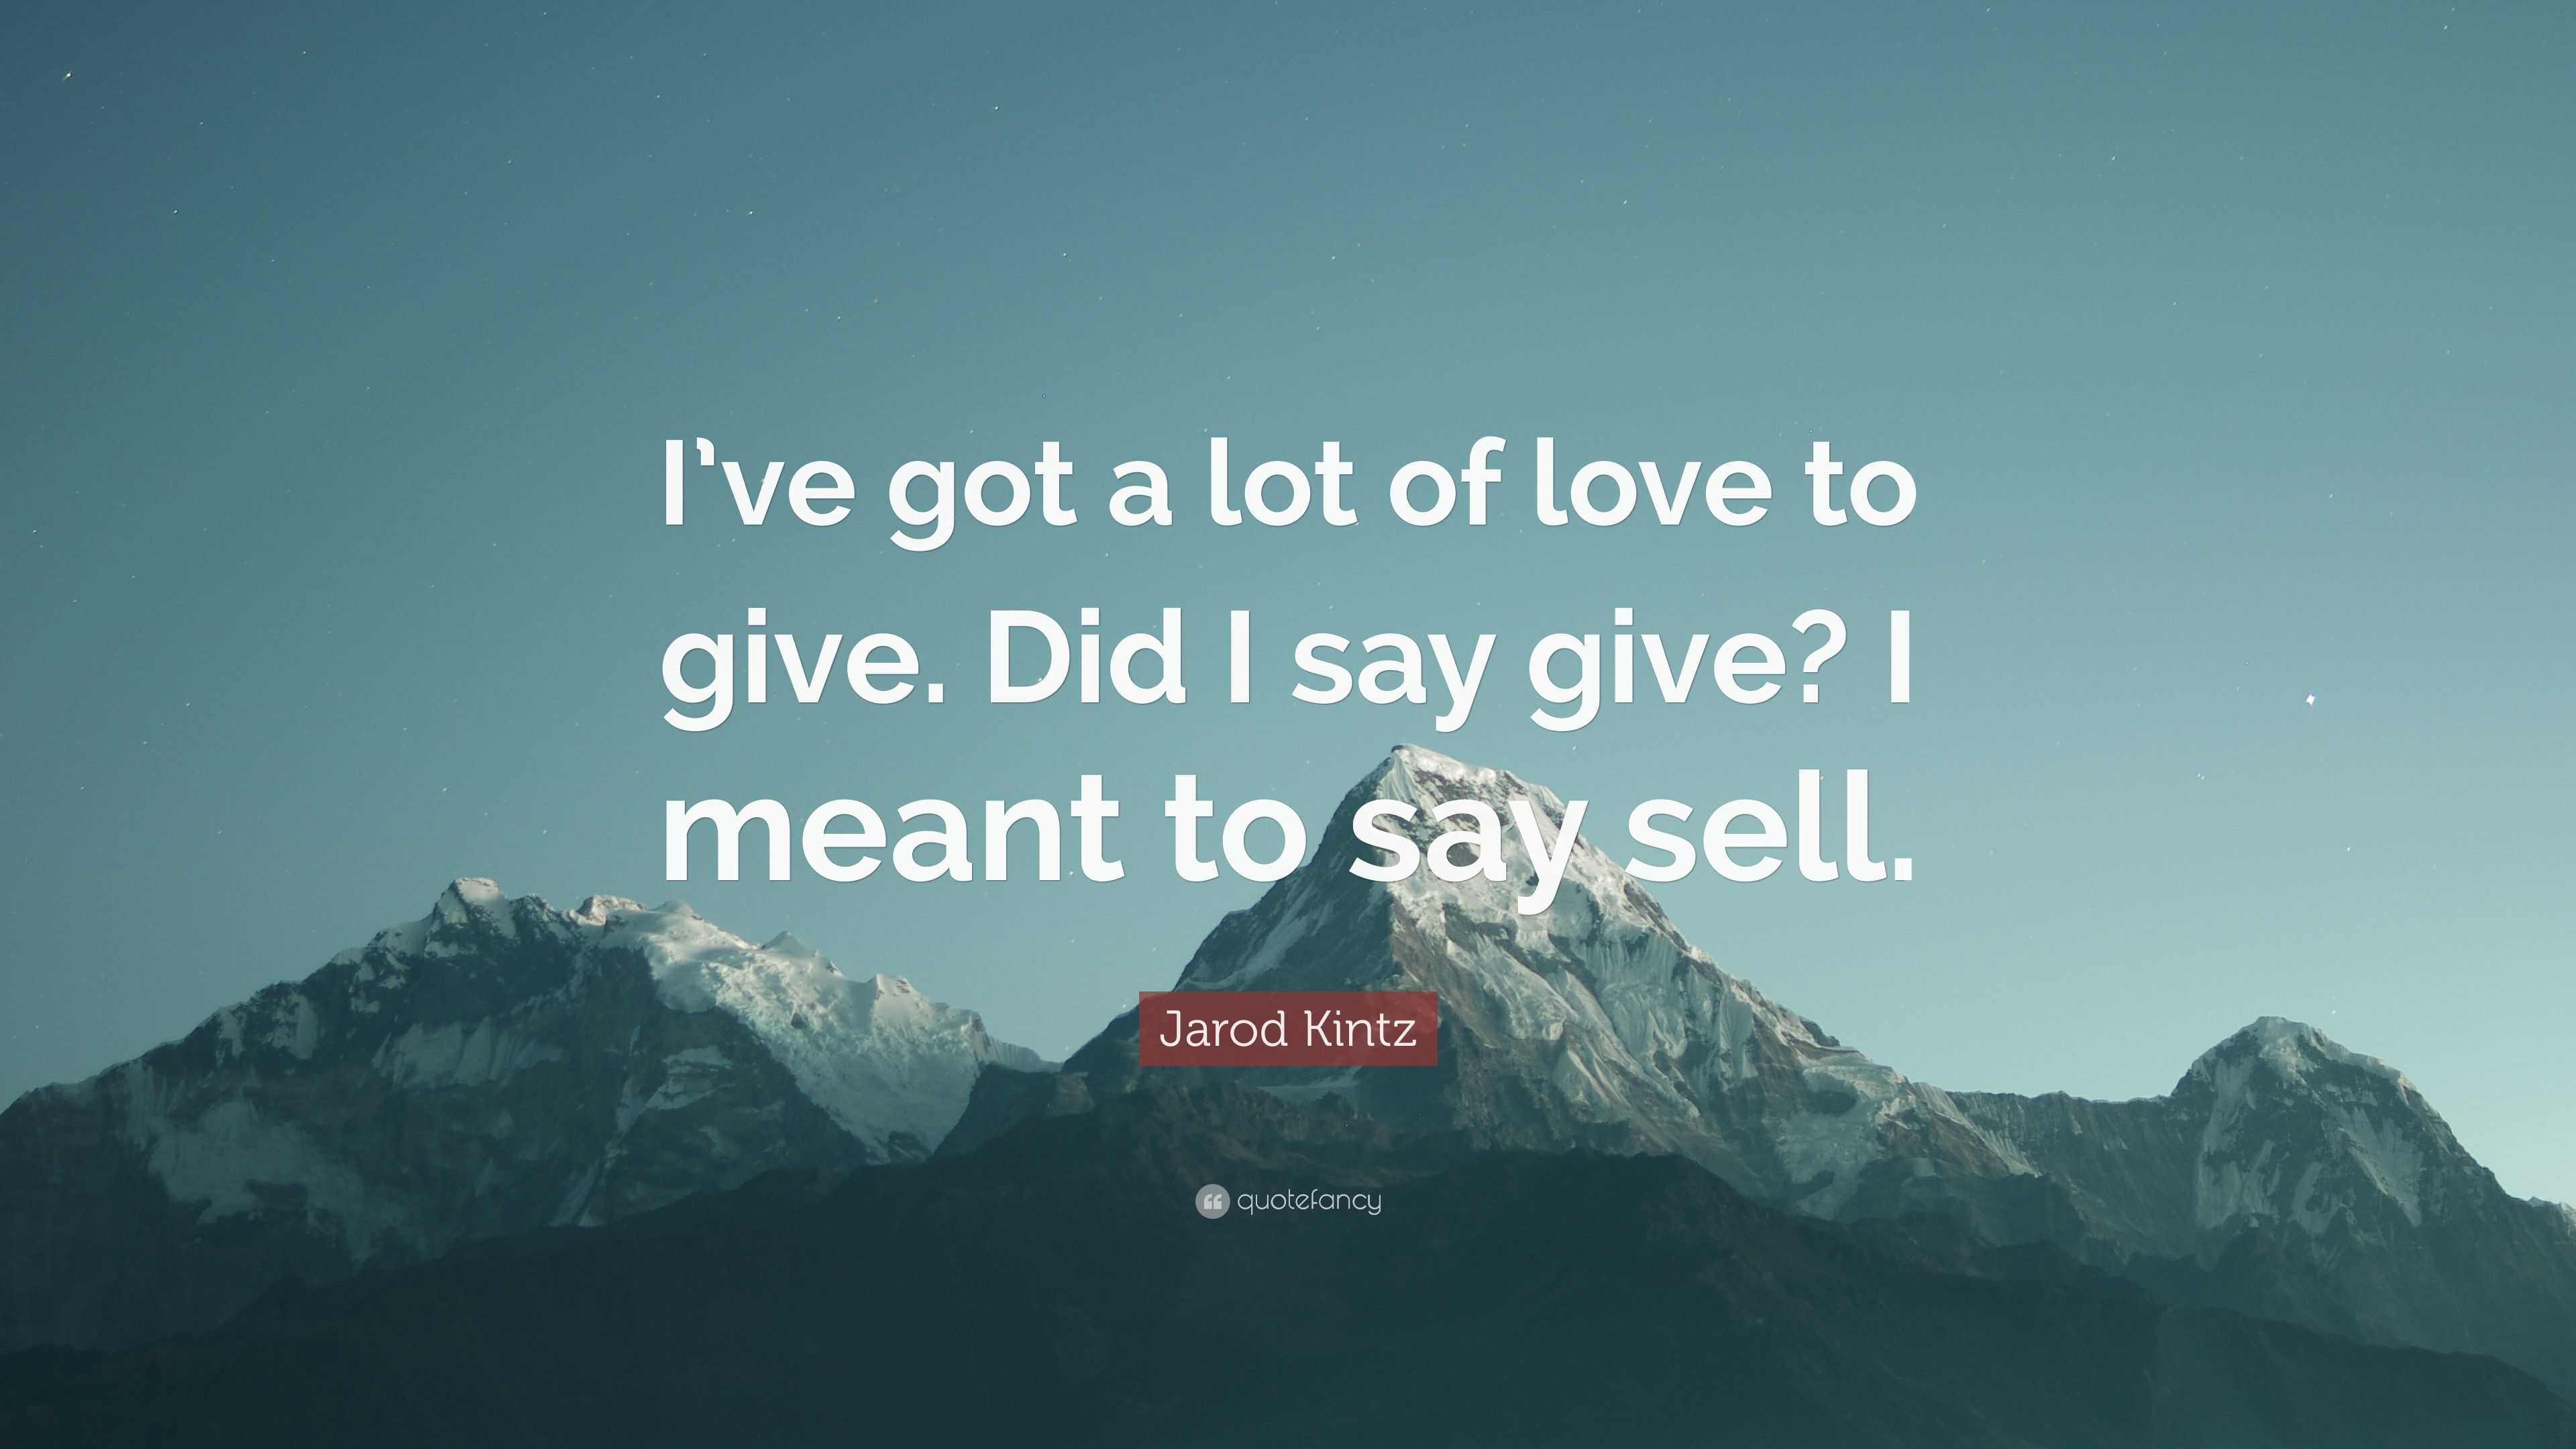 https://quotefancy.com/media/wallpaper/3840x2160/3226888-Jarod-Kintz-Quote-I-ve-got-a-lot-of-love-to-give-Did-I-say-give-I.jpg